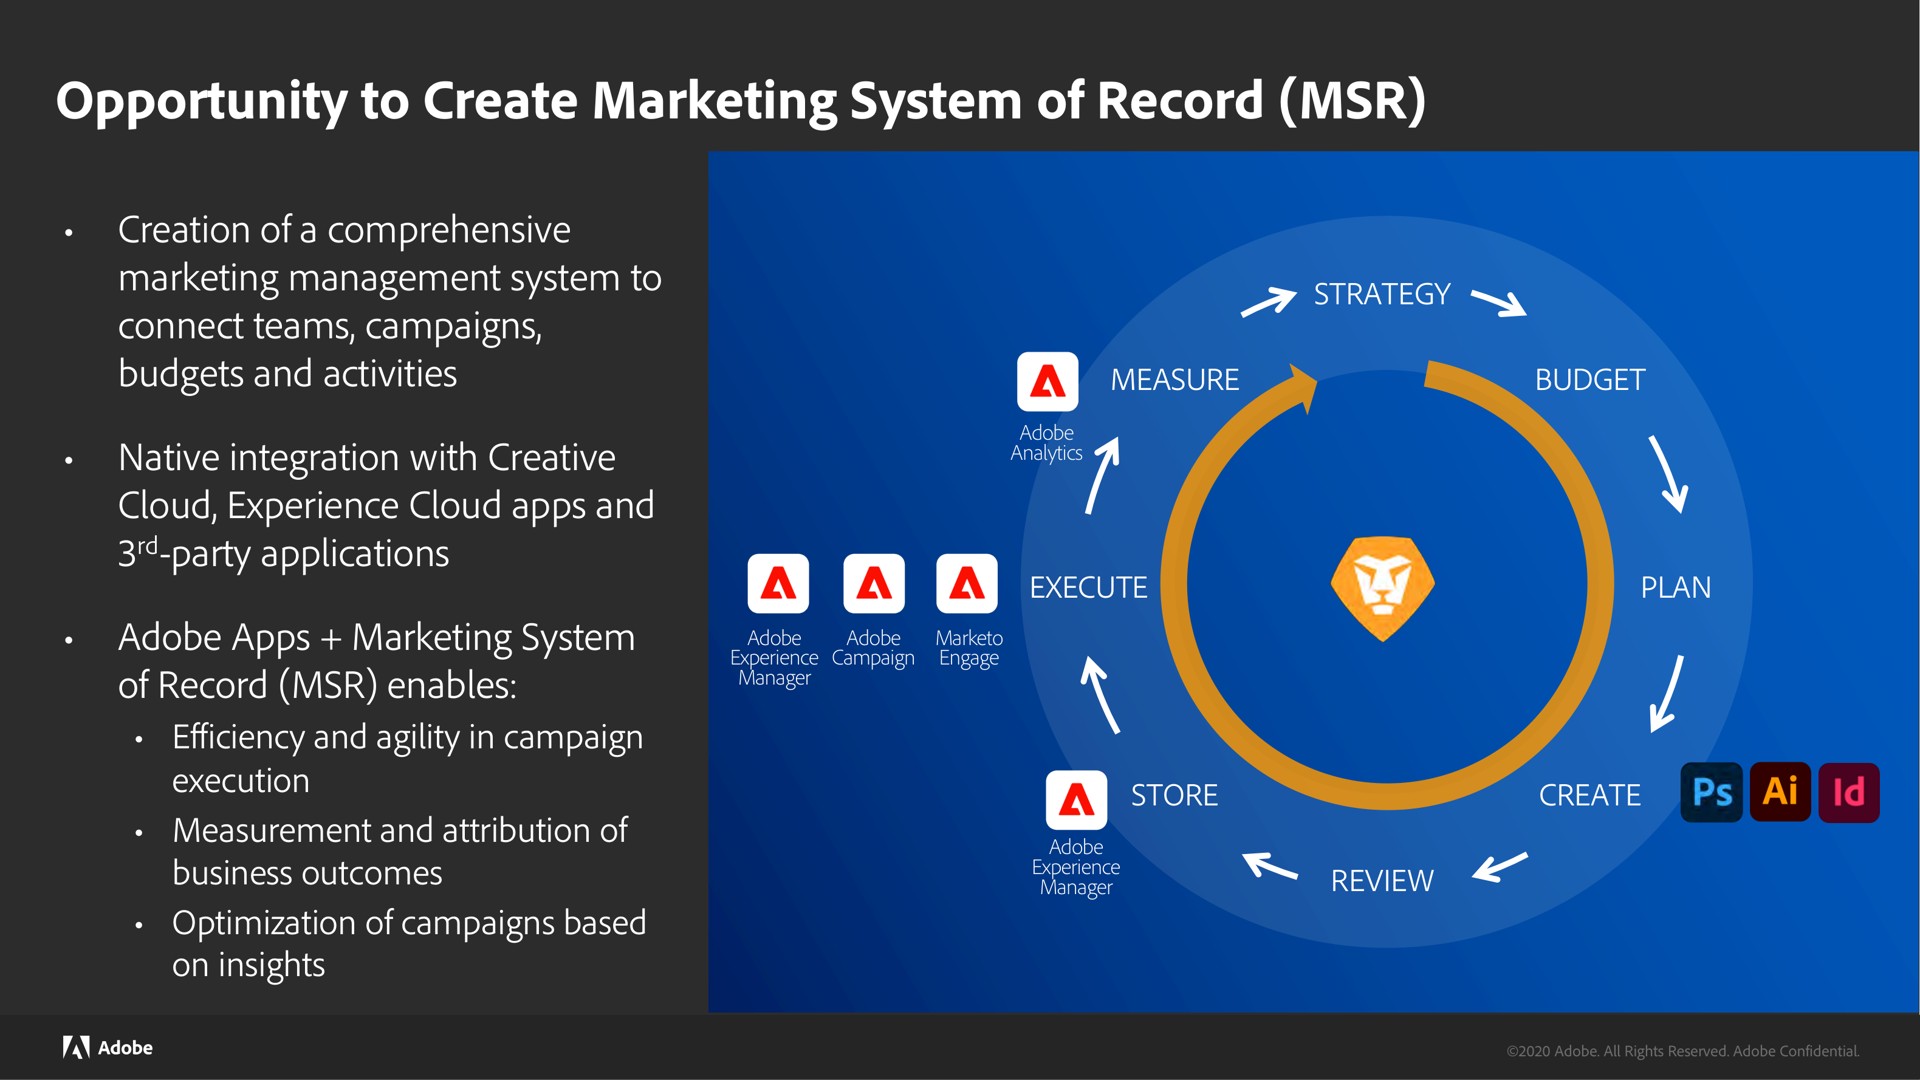 opportunity to create marketing system of record | Adobe